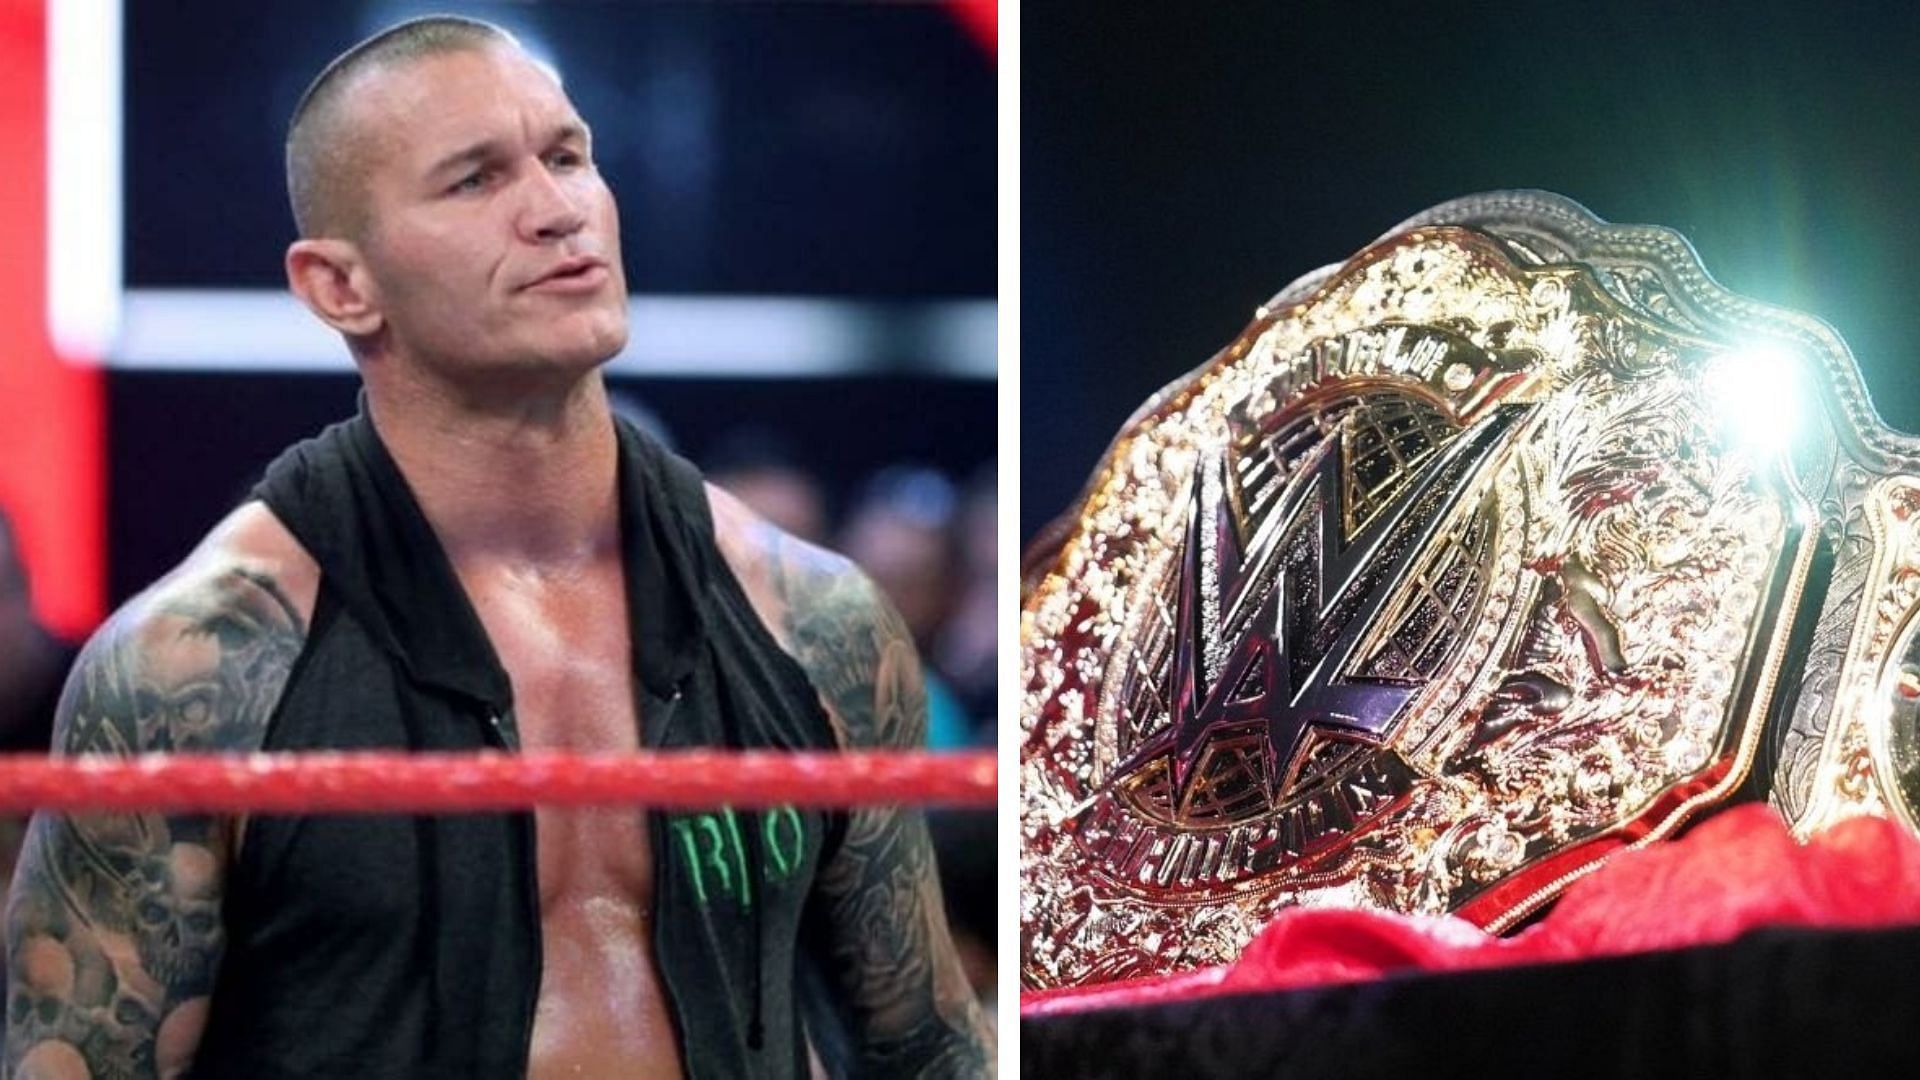 Randy Orton has been absent from WWE for almost a year